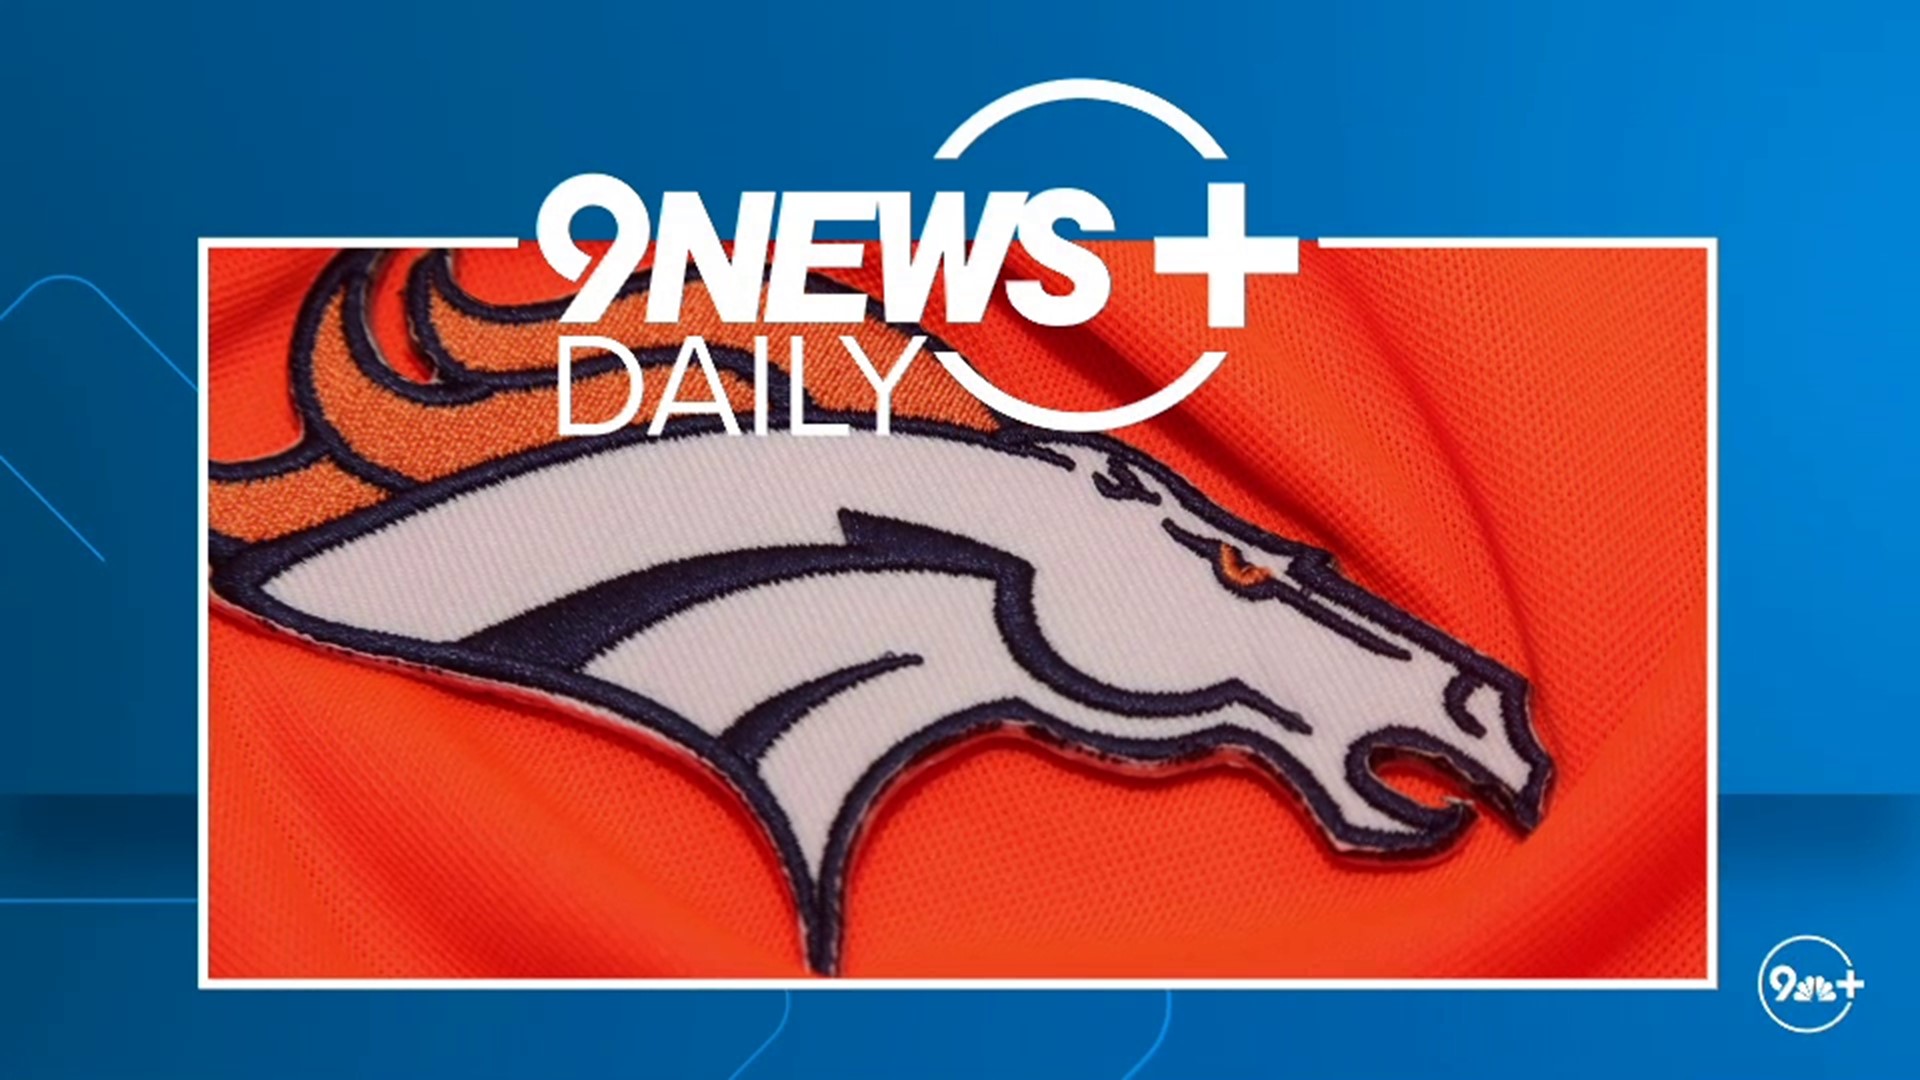 Should Denver Broncos' fans feel optimistic going into Sunday? Chris Bianchi sits down with 9NEWS sports reporter Scotty Gange, who thinks the answer is yes.